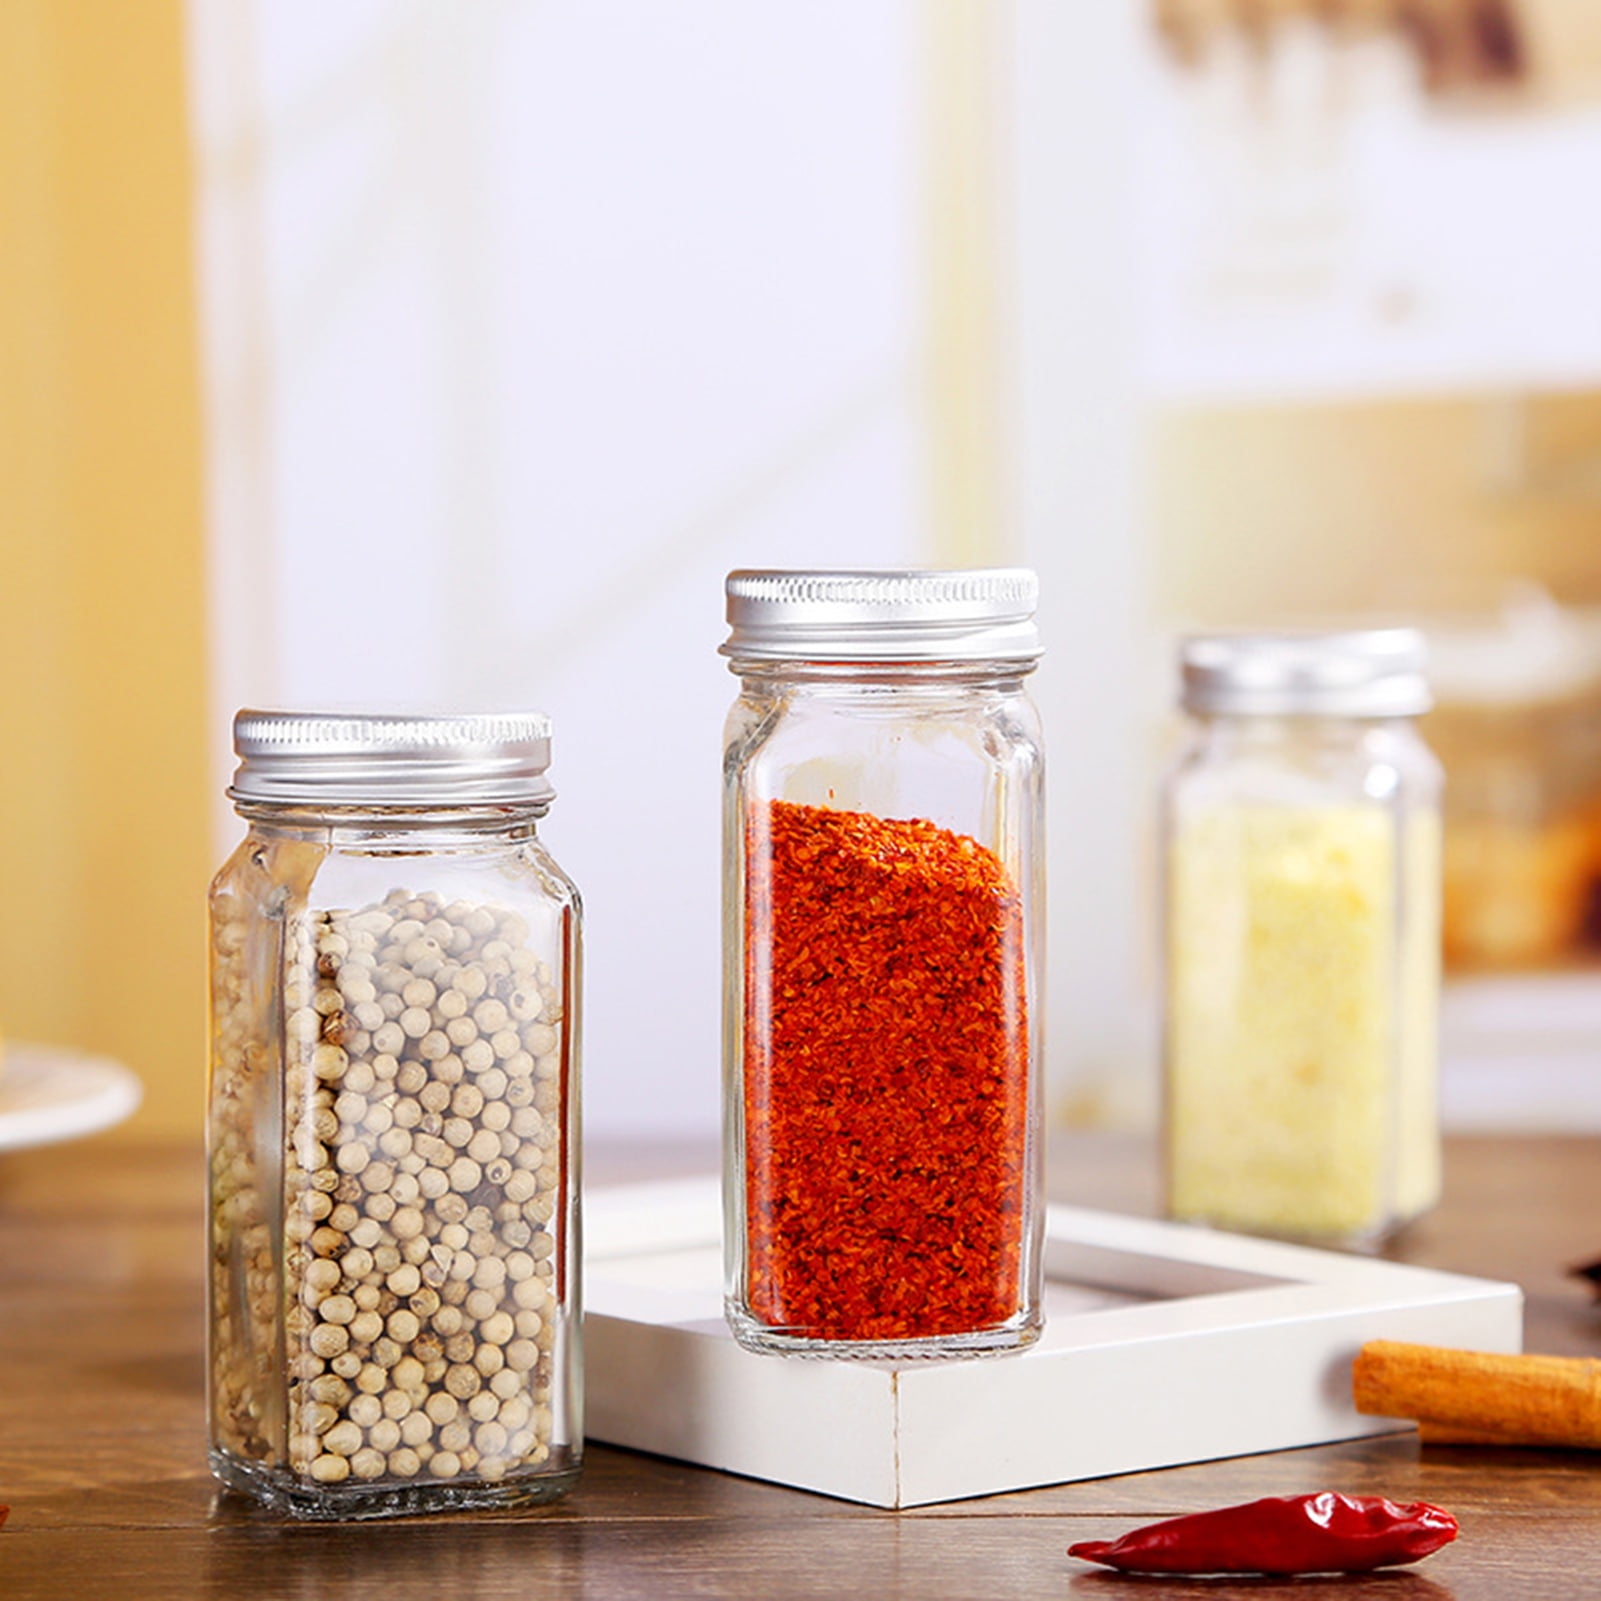 Limei 1 Pack Glass Spice Jars, Reusable Clear 4 OZ Square Seasoning  Containers with Silver Metal Caps and Pour/Sift Shaker Lids Spice Jars with  Labels